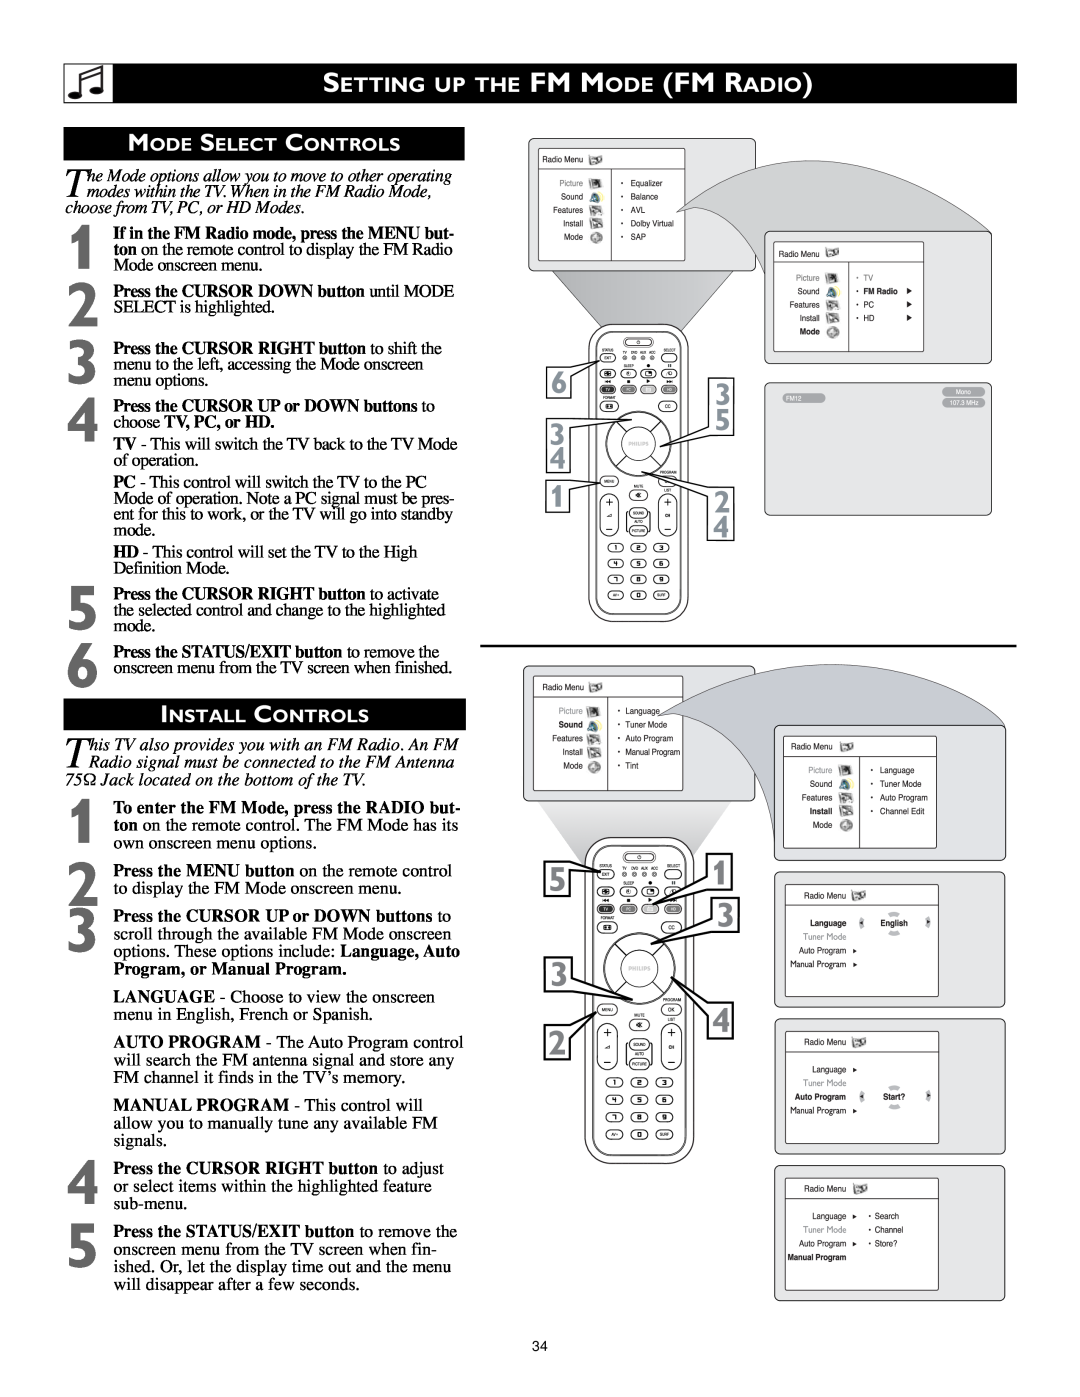 Philips 17PF9946/37 user manual 1 2, Setting Up The Fm Mode Fm Radio, Mode Select Controls, Install Controls 